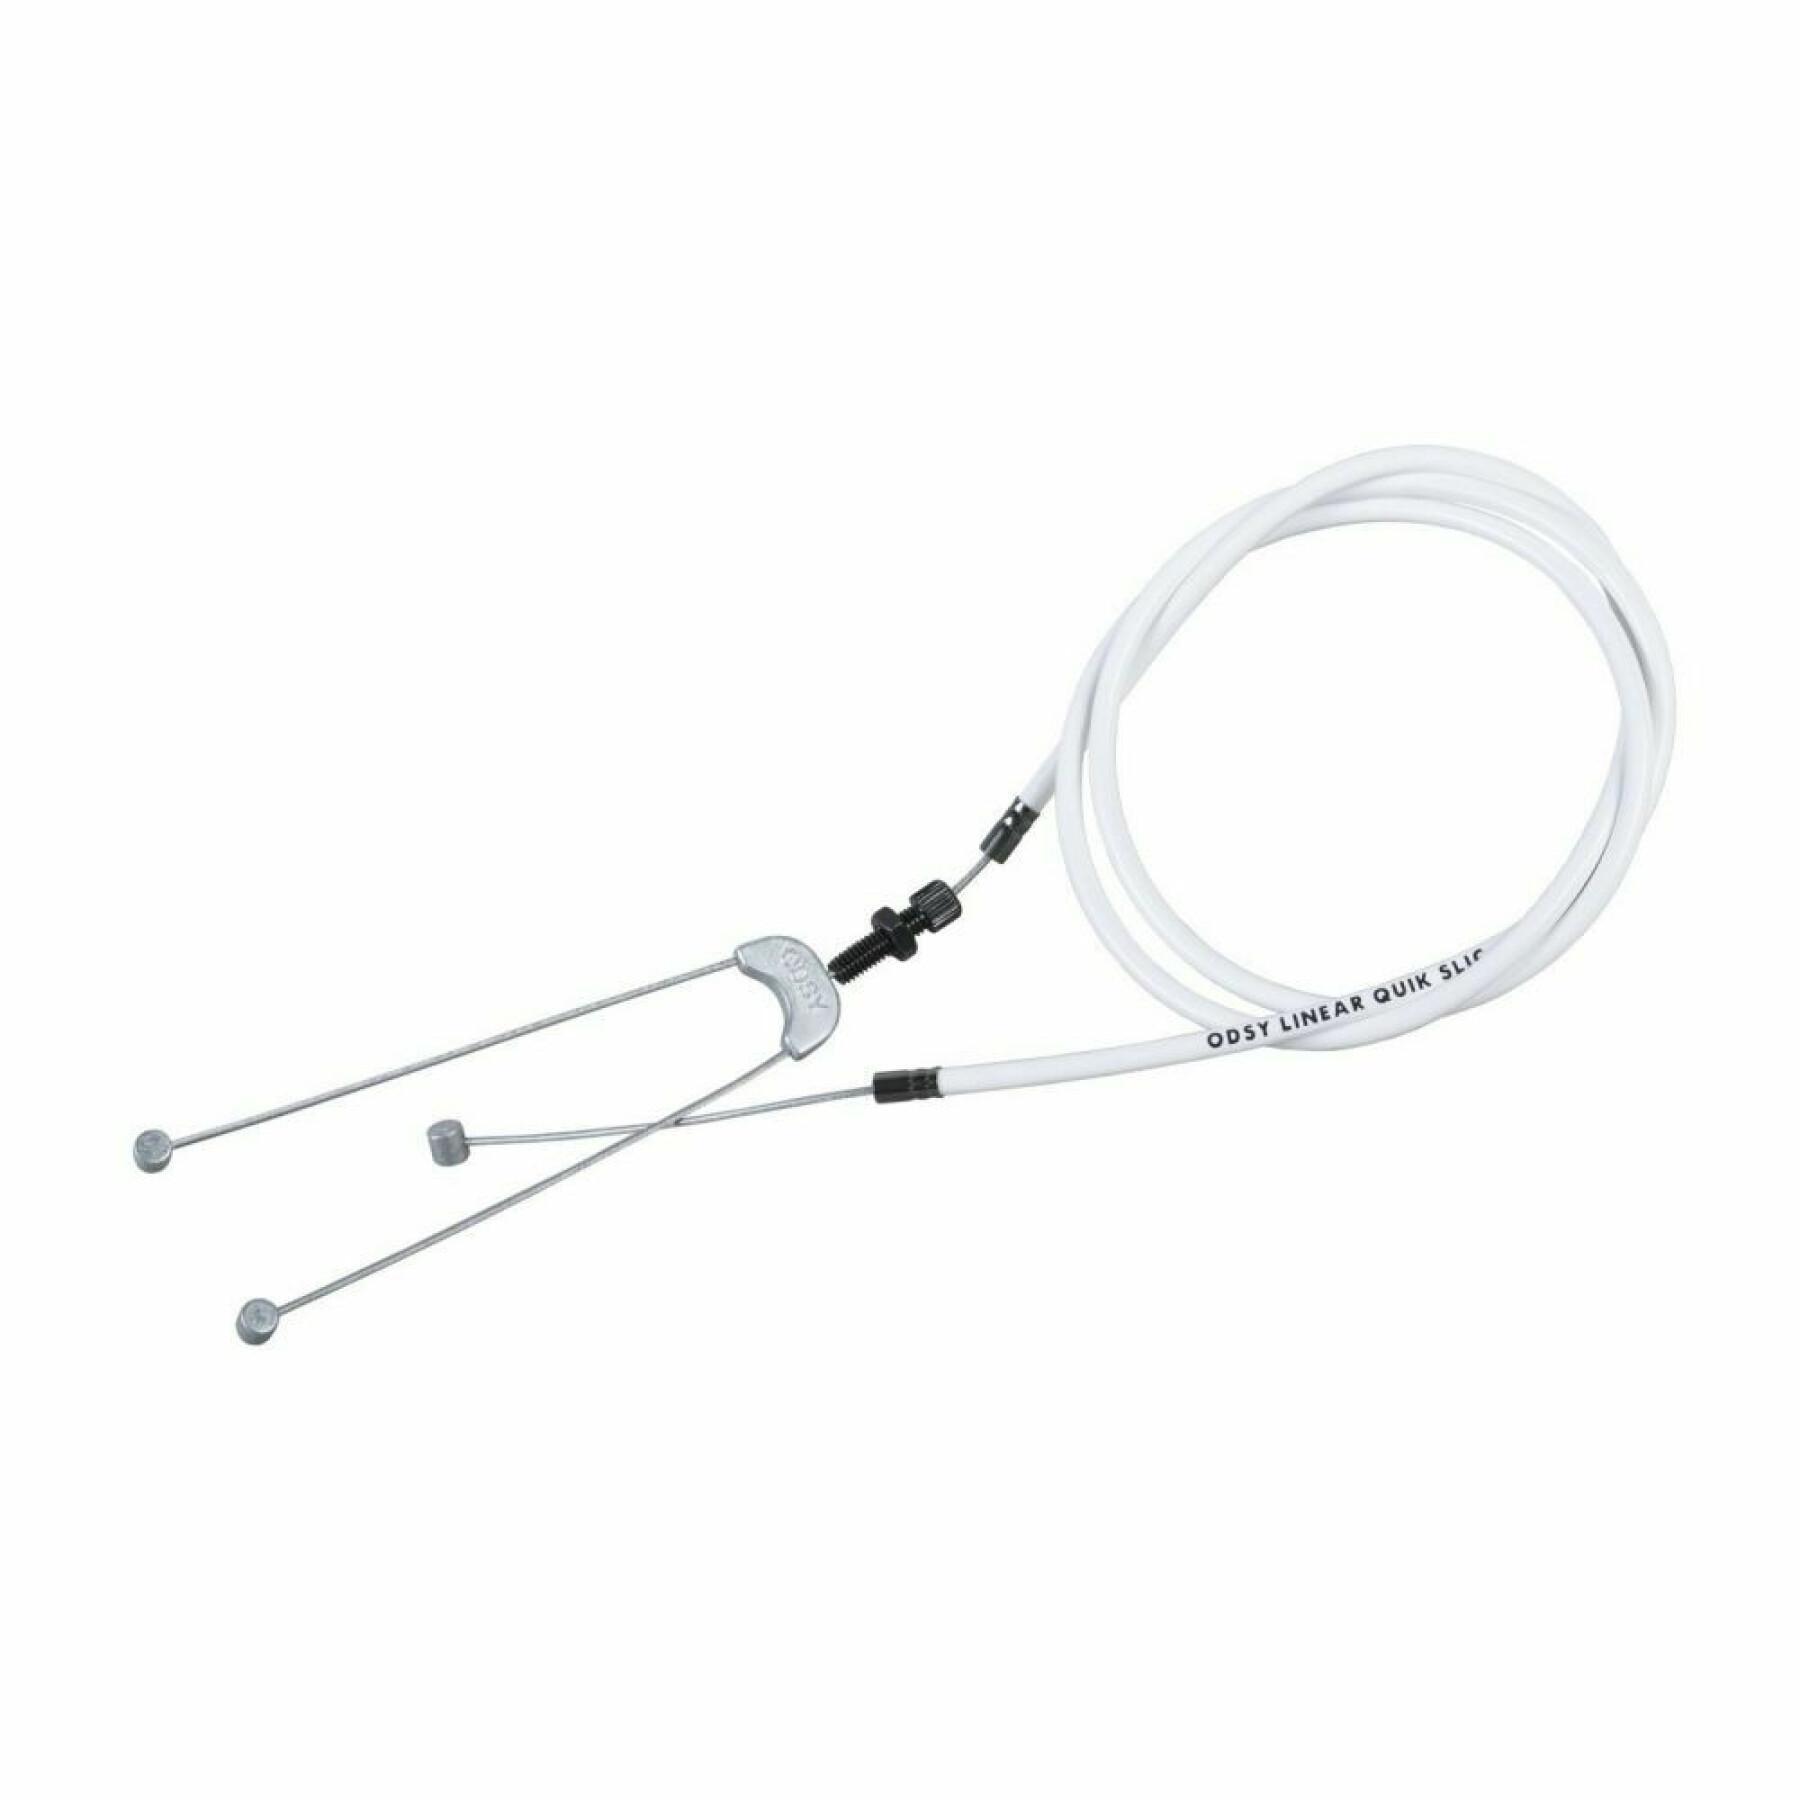 Brake cable Odyssey linear quik